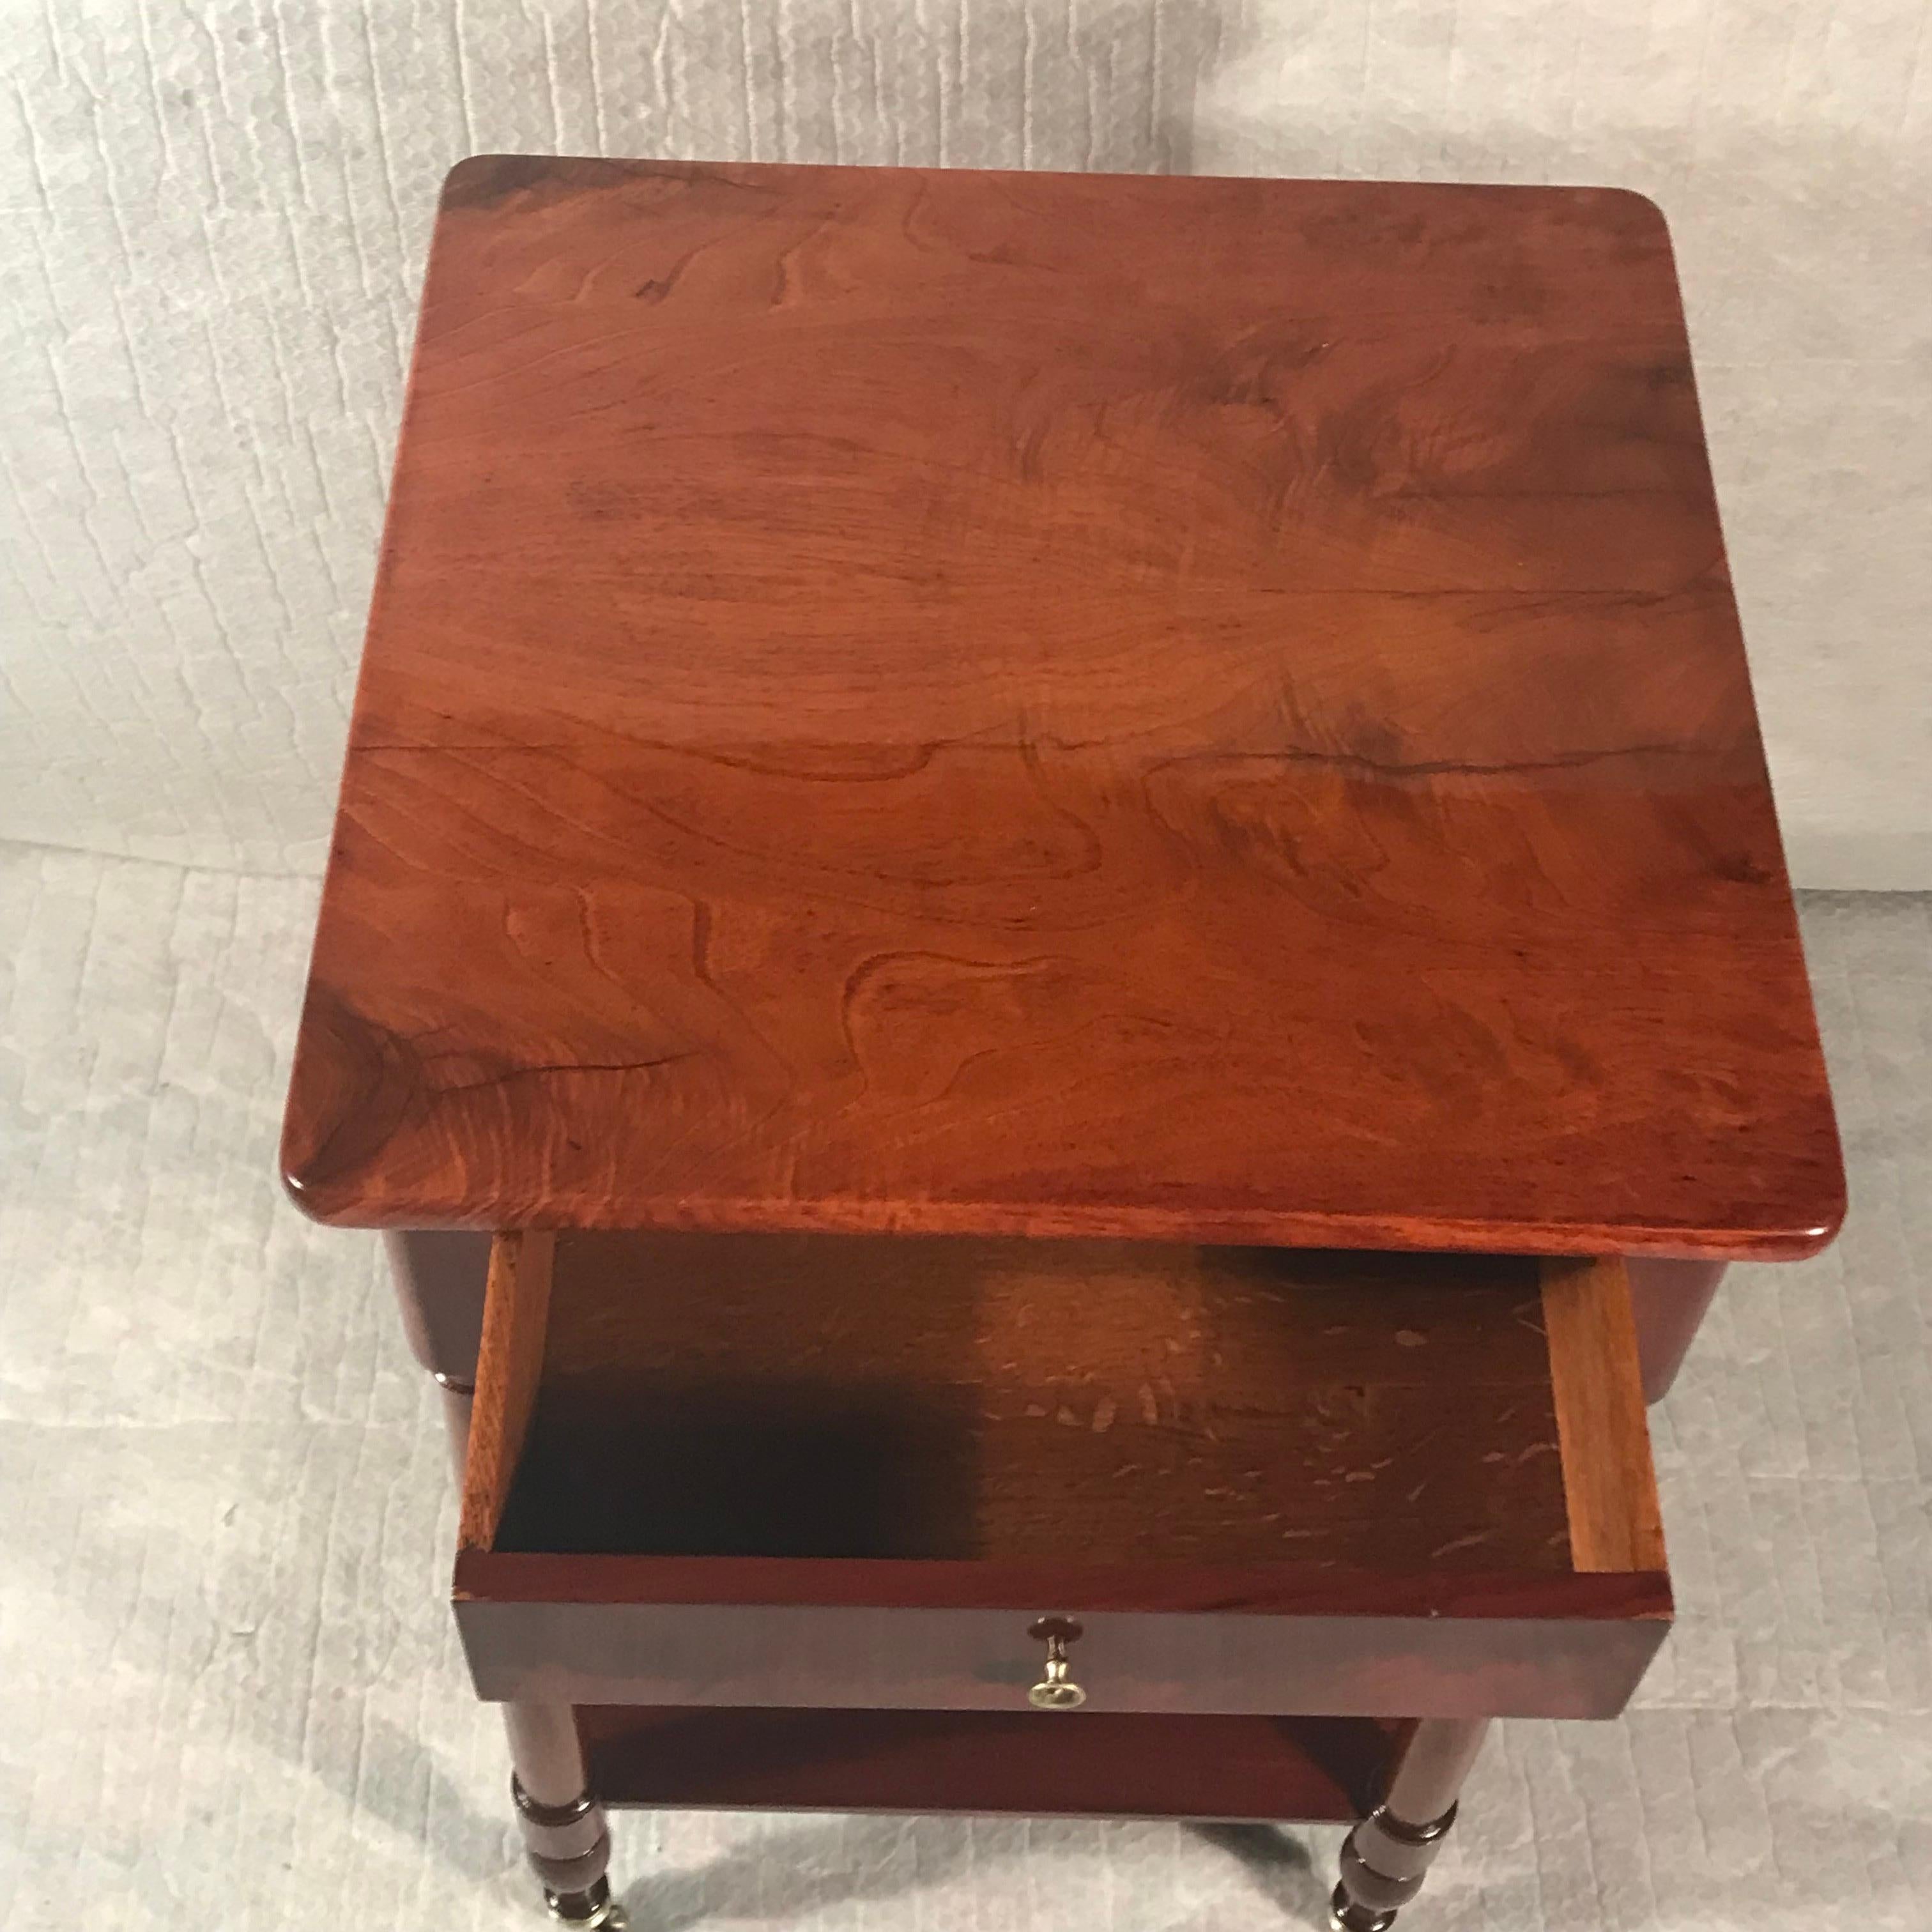 Transport yourself to the elegance of the mid-19th century with this charming side table or library table. Featuring two shelves in the lower part and standing gracefully on caster wheels, this table seamlessly blends functionality with vintage